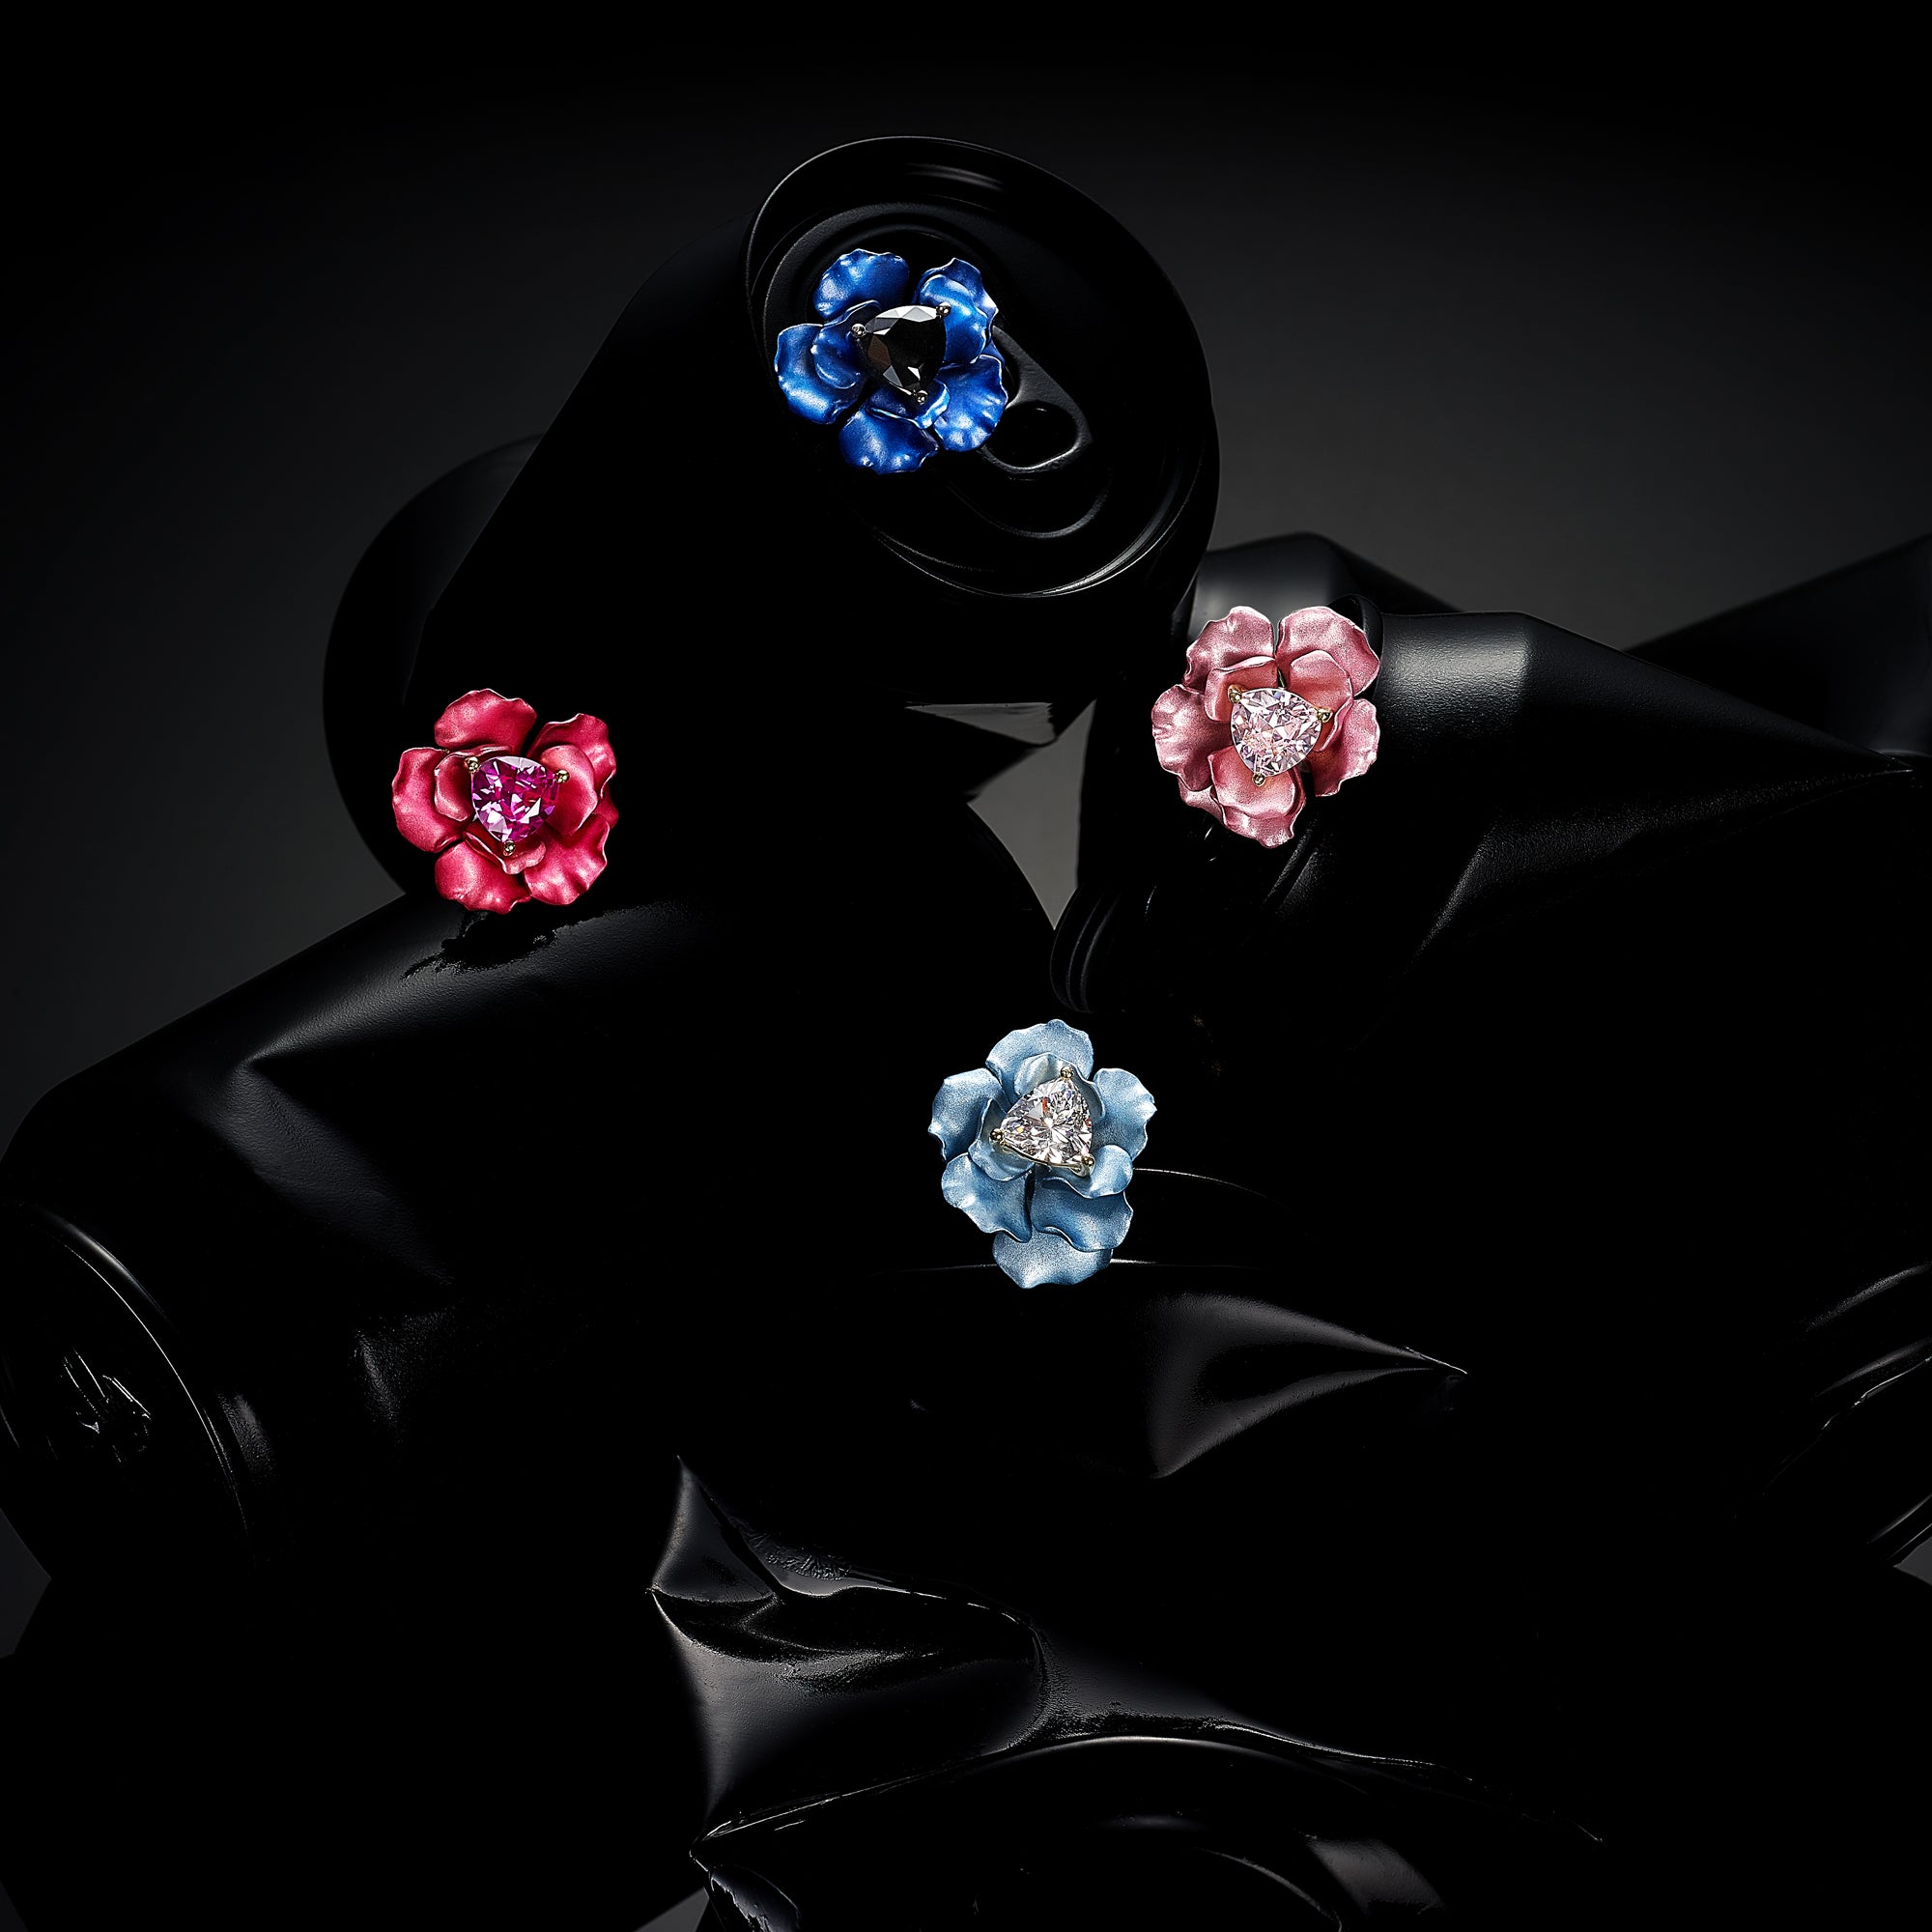 Midnight Rose Studs, Earrings, Anabela Chan Joaillerie - Fine jewelry with laboratory grown and created gemstones hand-crafted in the United Kingdom. Anabela Chan Joaillerie is the first fine jewellery brand in the world to champion laboratory-grown and created gemstones with high jewellery design, artisanal craftsmanship and a focus on ethical and sustainable innovations.